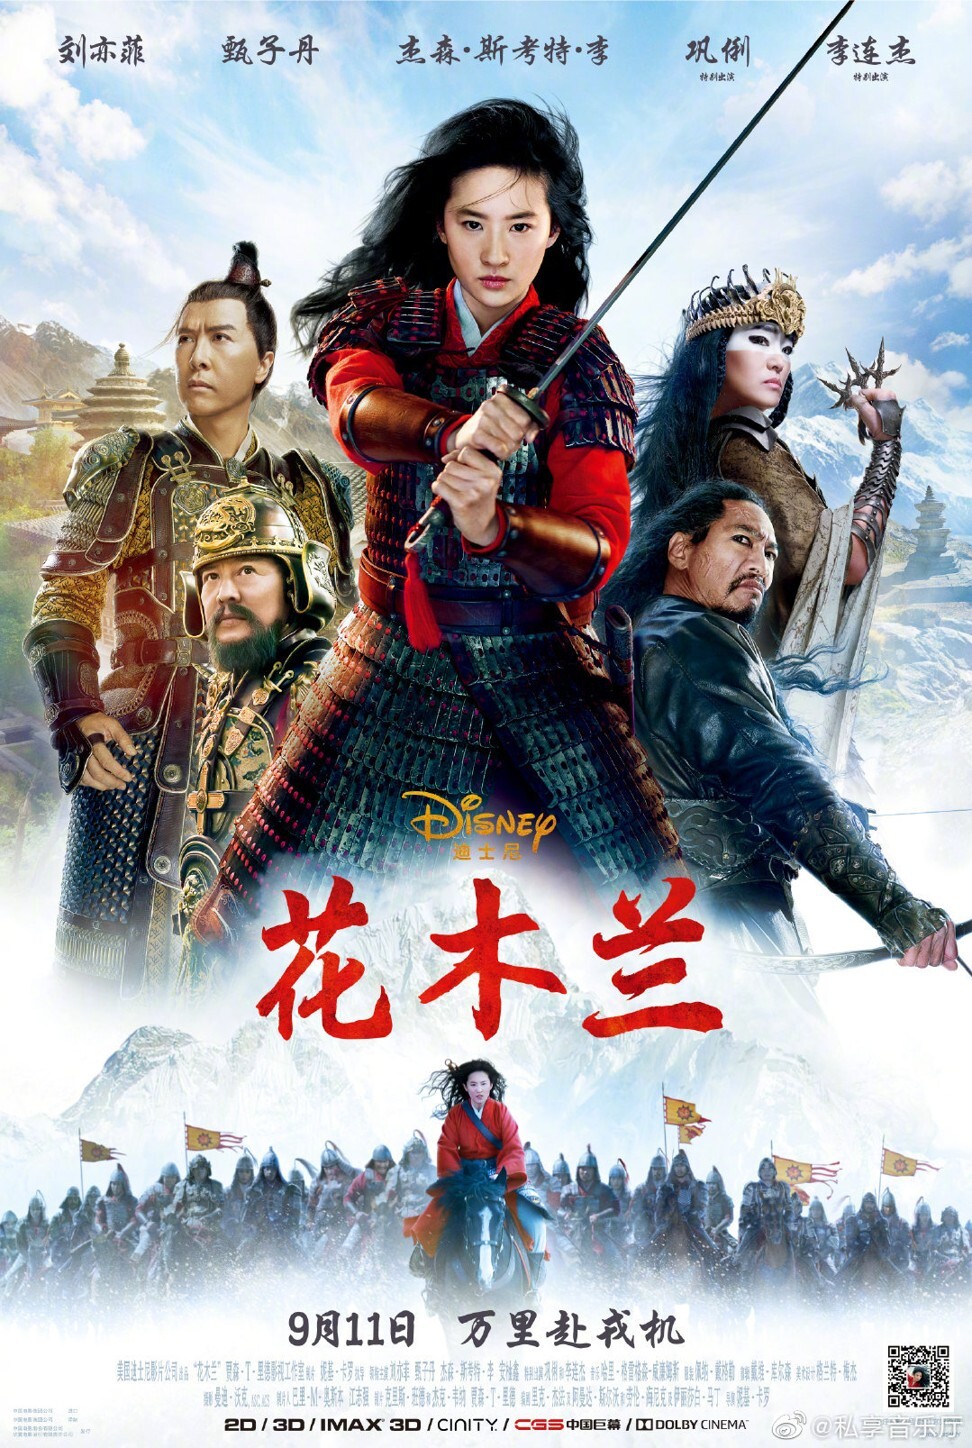 The mainland Chinese poster for Disney's 2020 live-action epic Mulan. Image: Handout